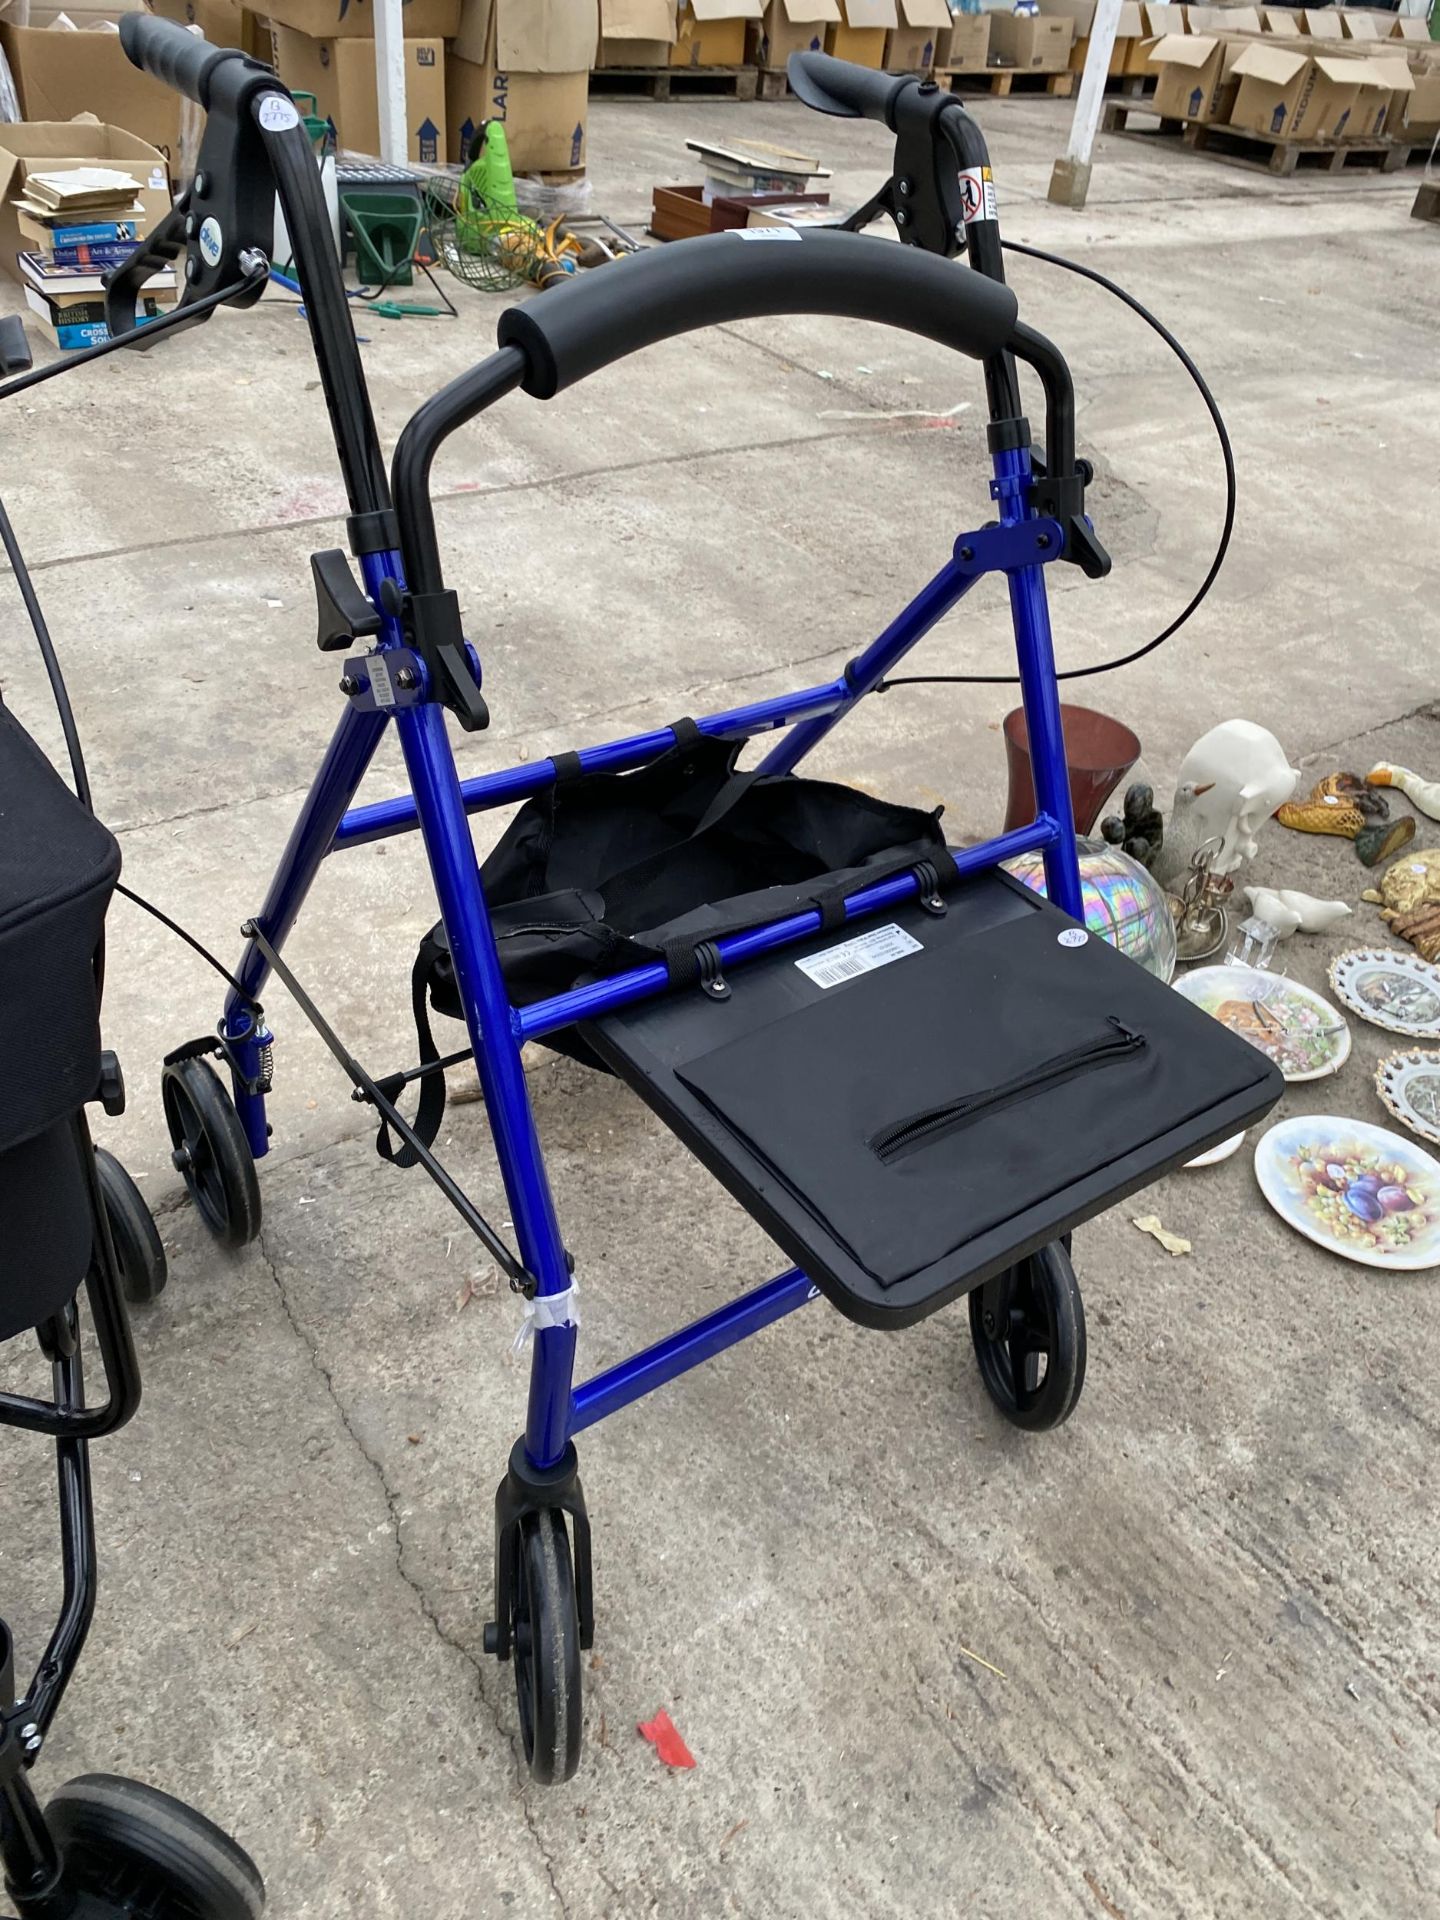 TWO MOBILITY AIDS AND A WHEEL CHAIR - Bild 5 aus 6